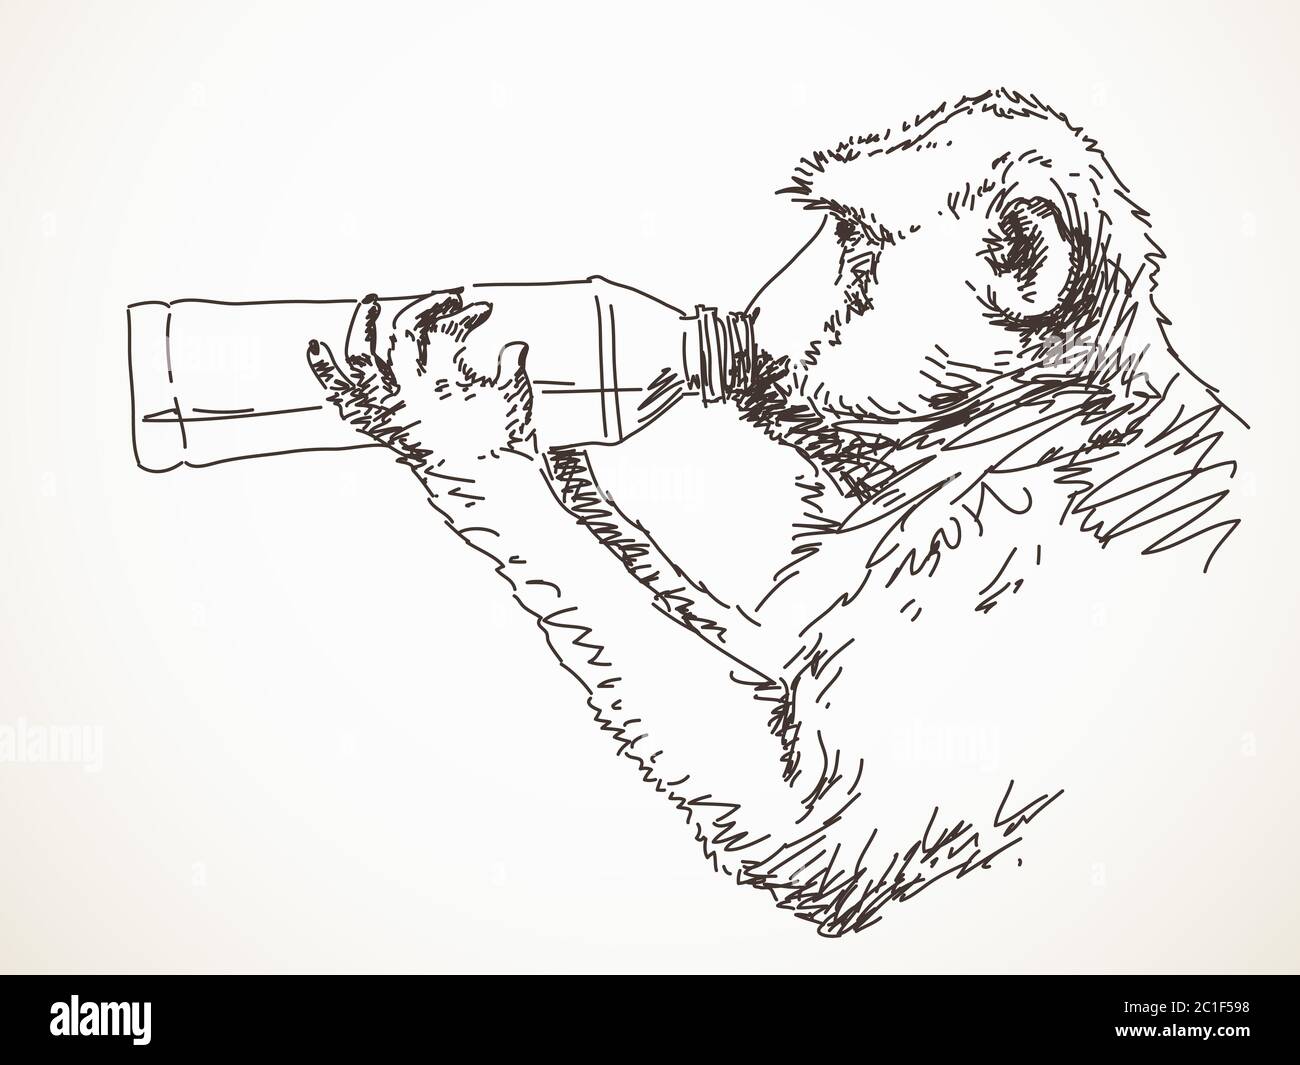 Sketch of monkey drinking water Hand drawn vector illustration Stock Vector